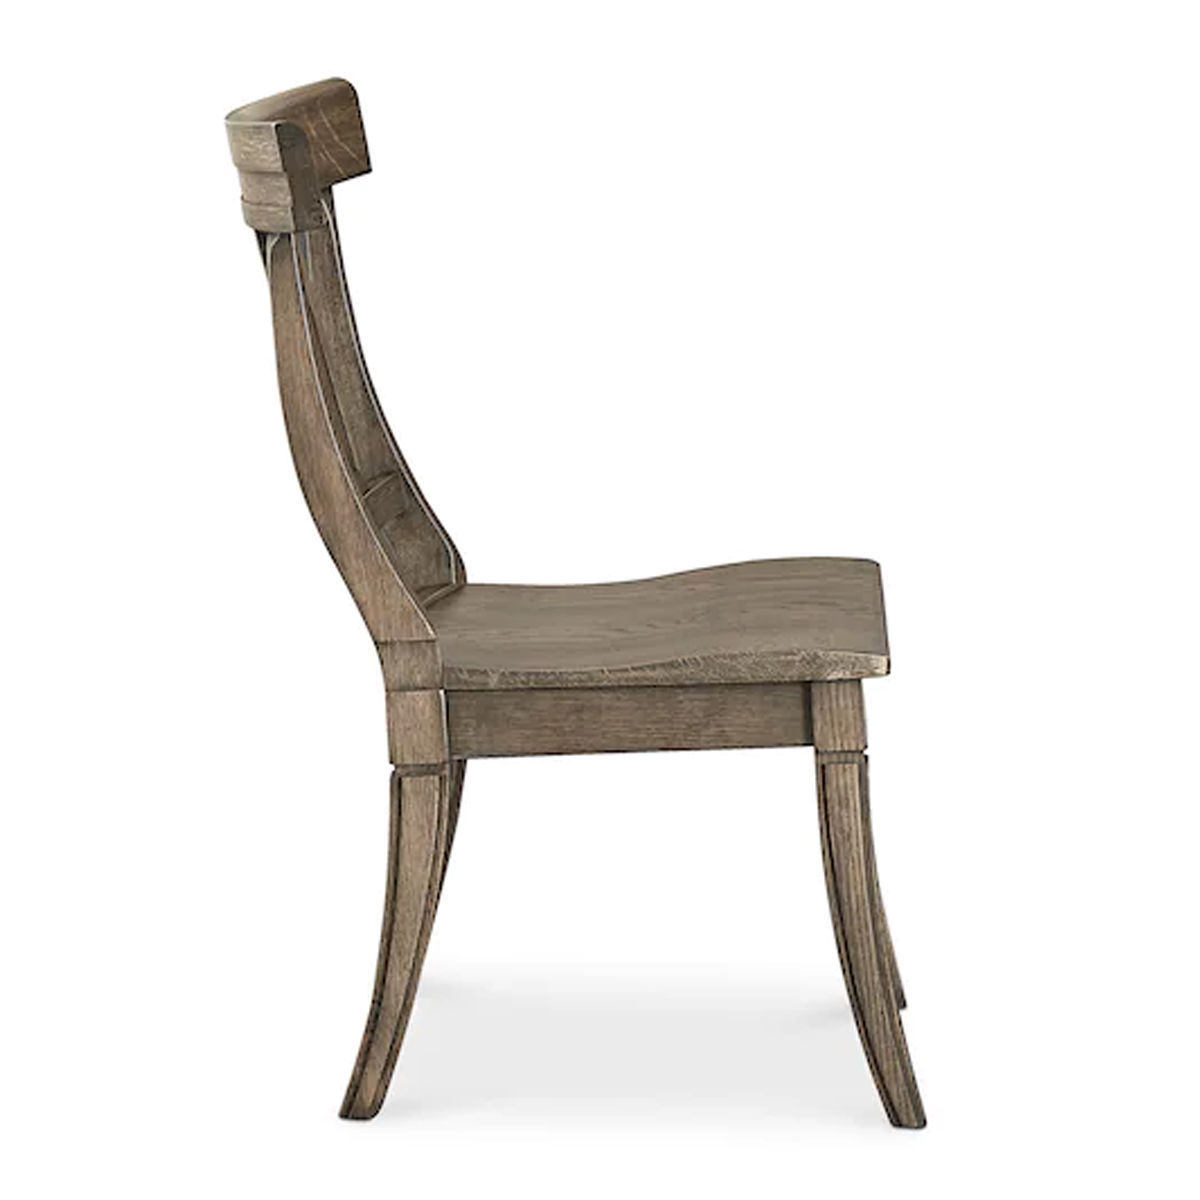 Picture of BAXTER OAK SIDE CHAIR